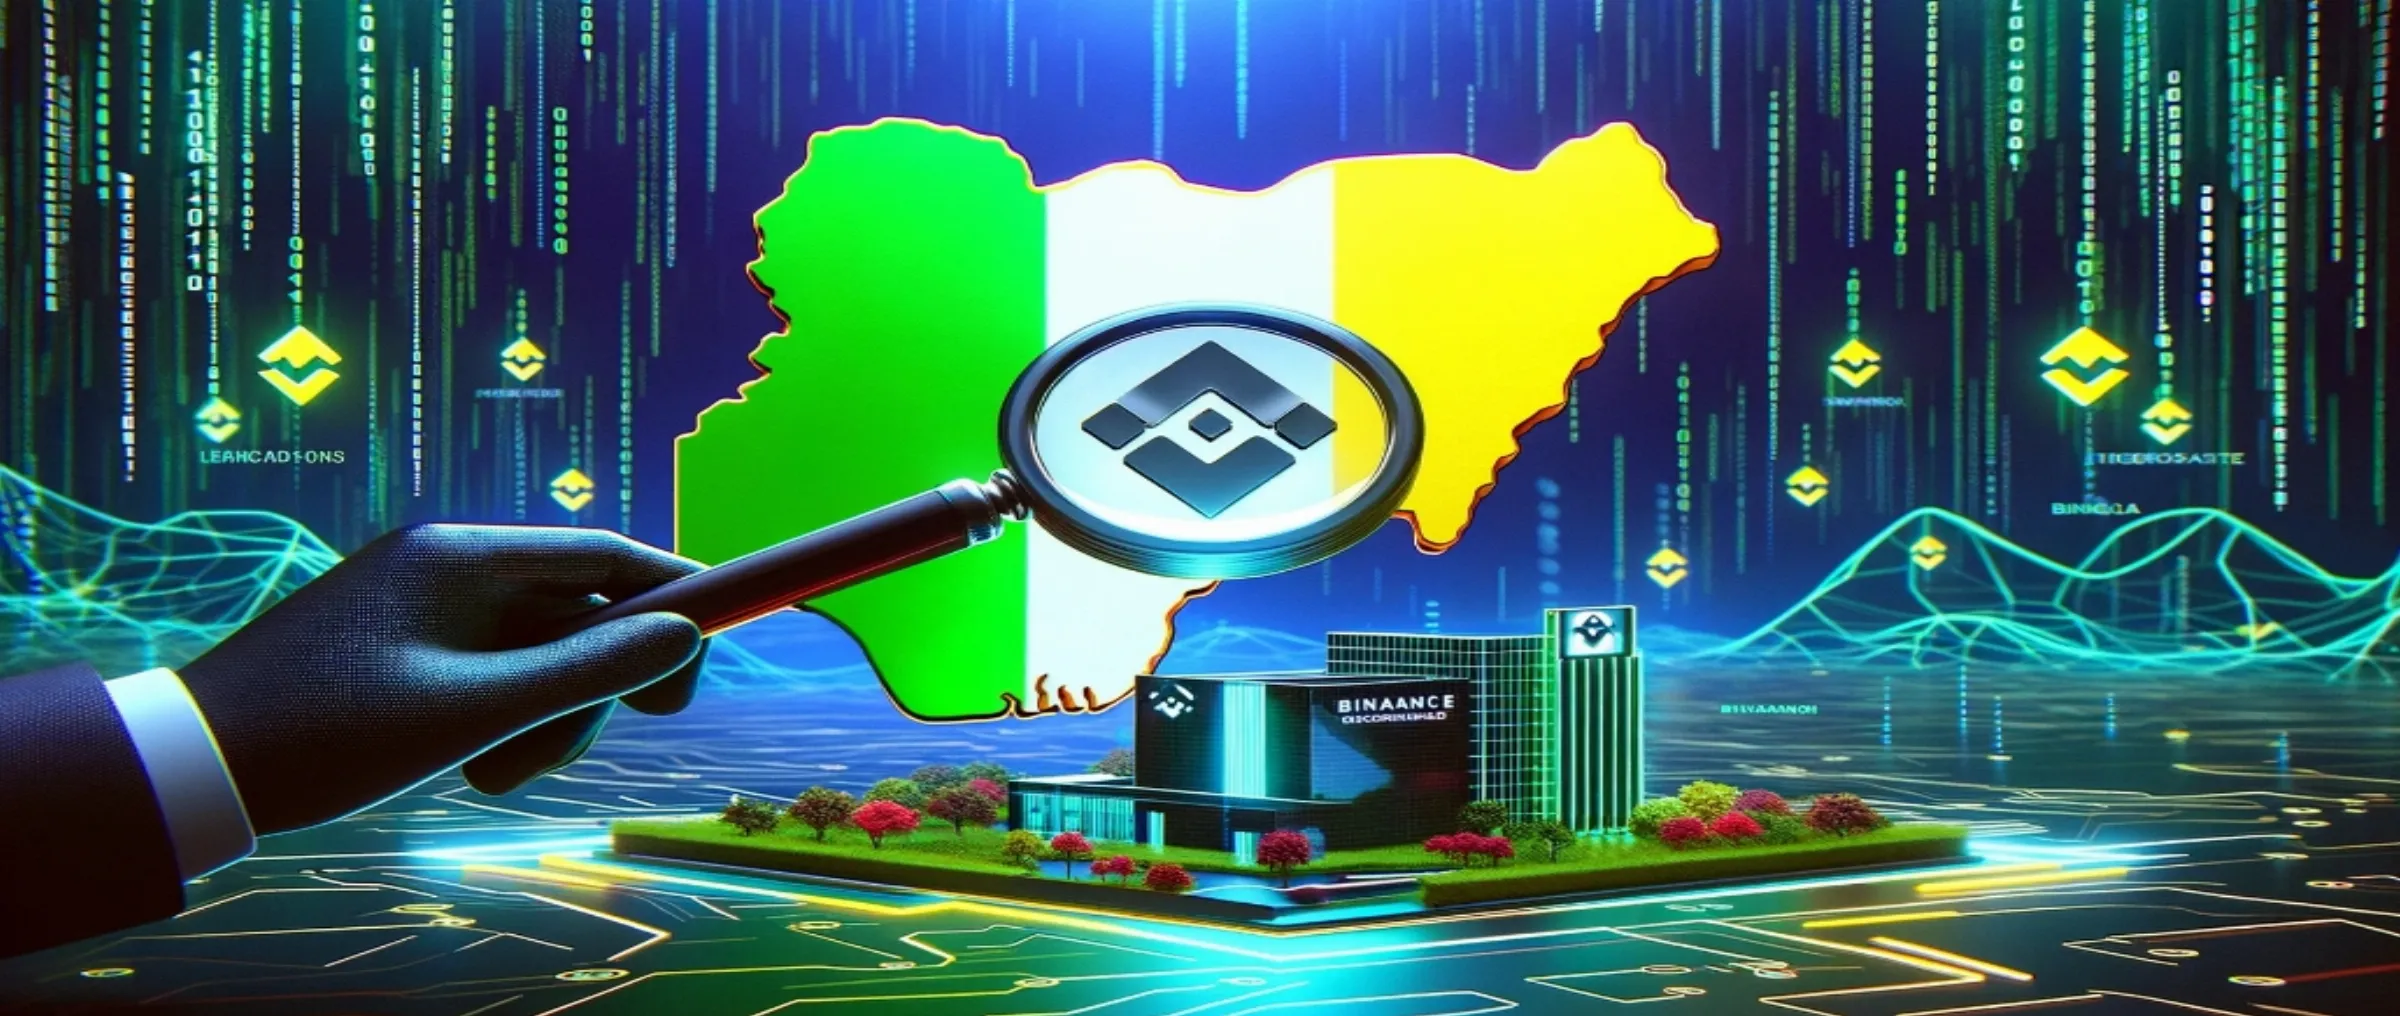 Nigeria has demanded information from Binance about all users from the country